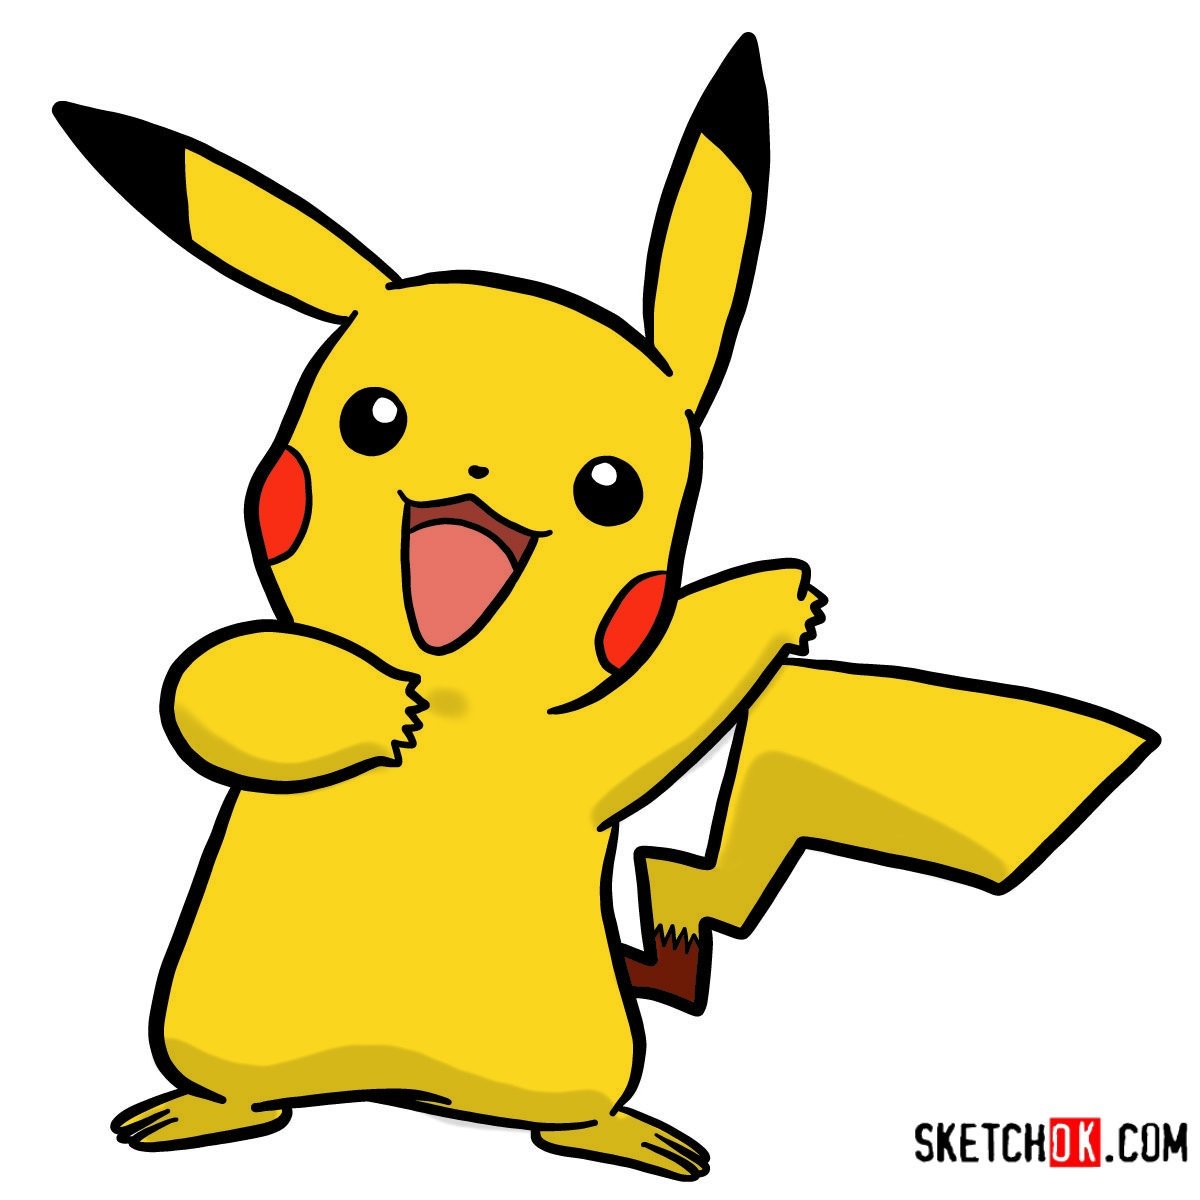 How to draw Happy Pikachu | Pokemon - Sketchok easy drawing guides